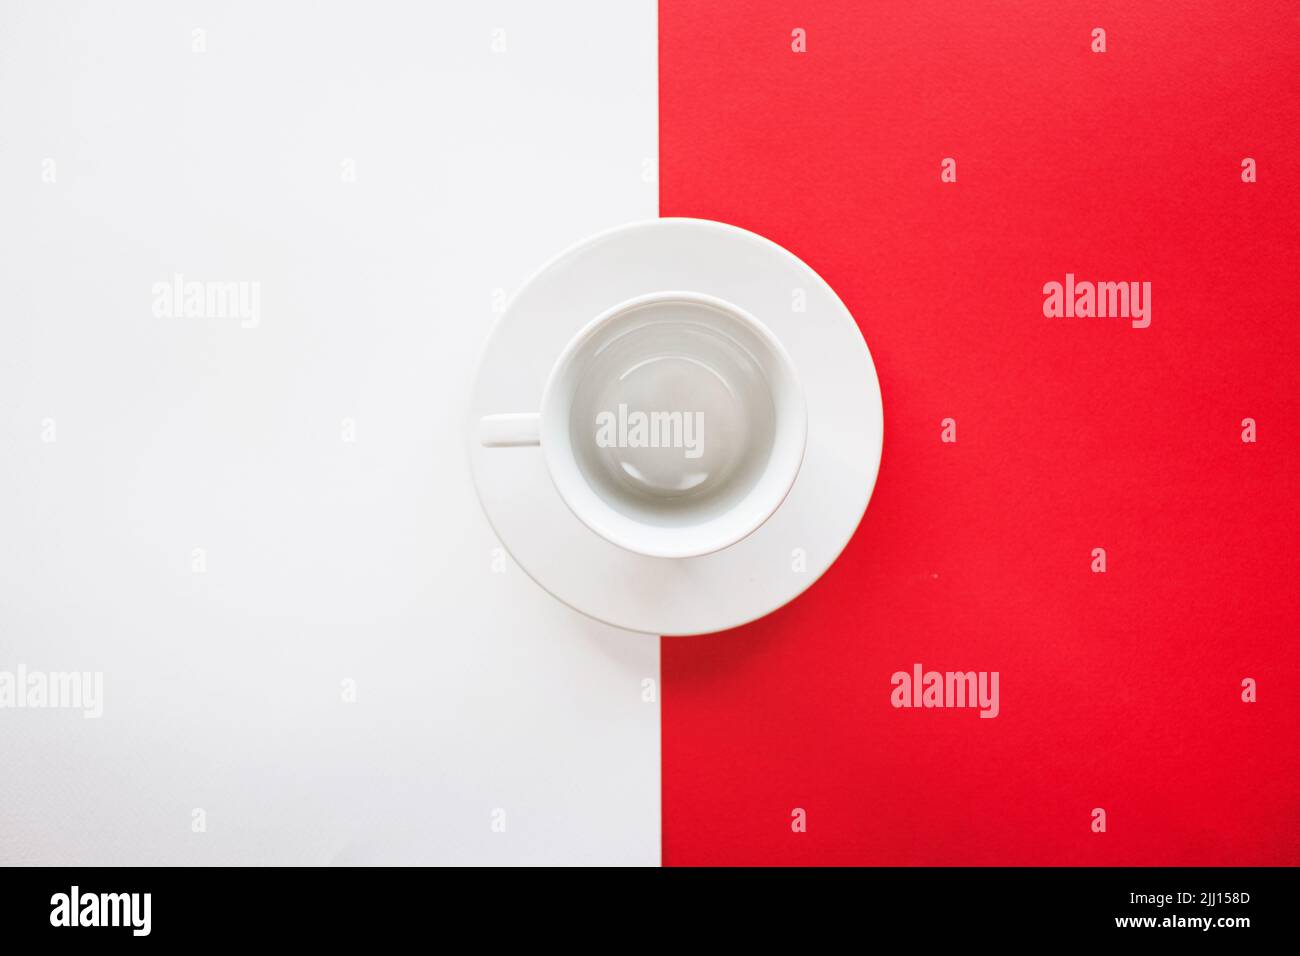 Empty tea cup isolated on red and white background Stock Photo